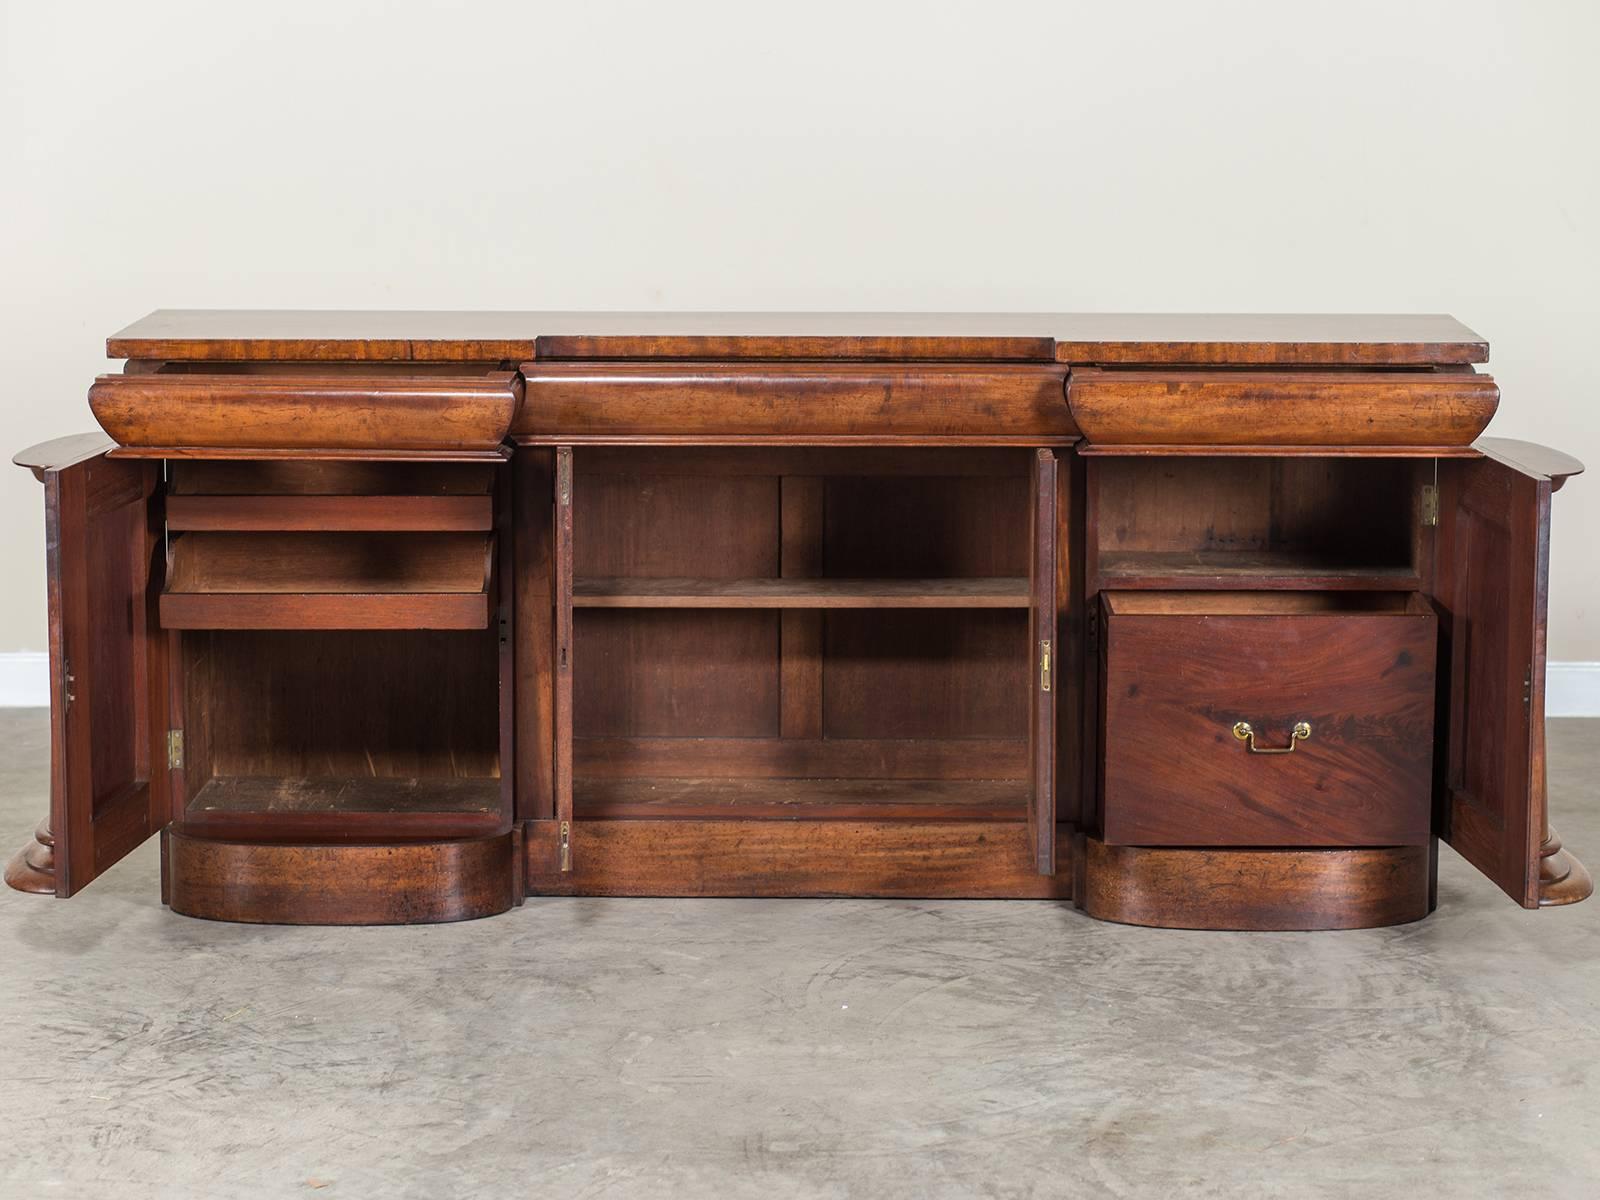 The powerful architectural profile of this antique English Regency sideboard buffet, circa 1825 showcases the exceptional grain of the mahogany timber used in its construction. The left and right cabinet door each feature a tapered column pilaster